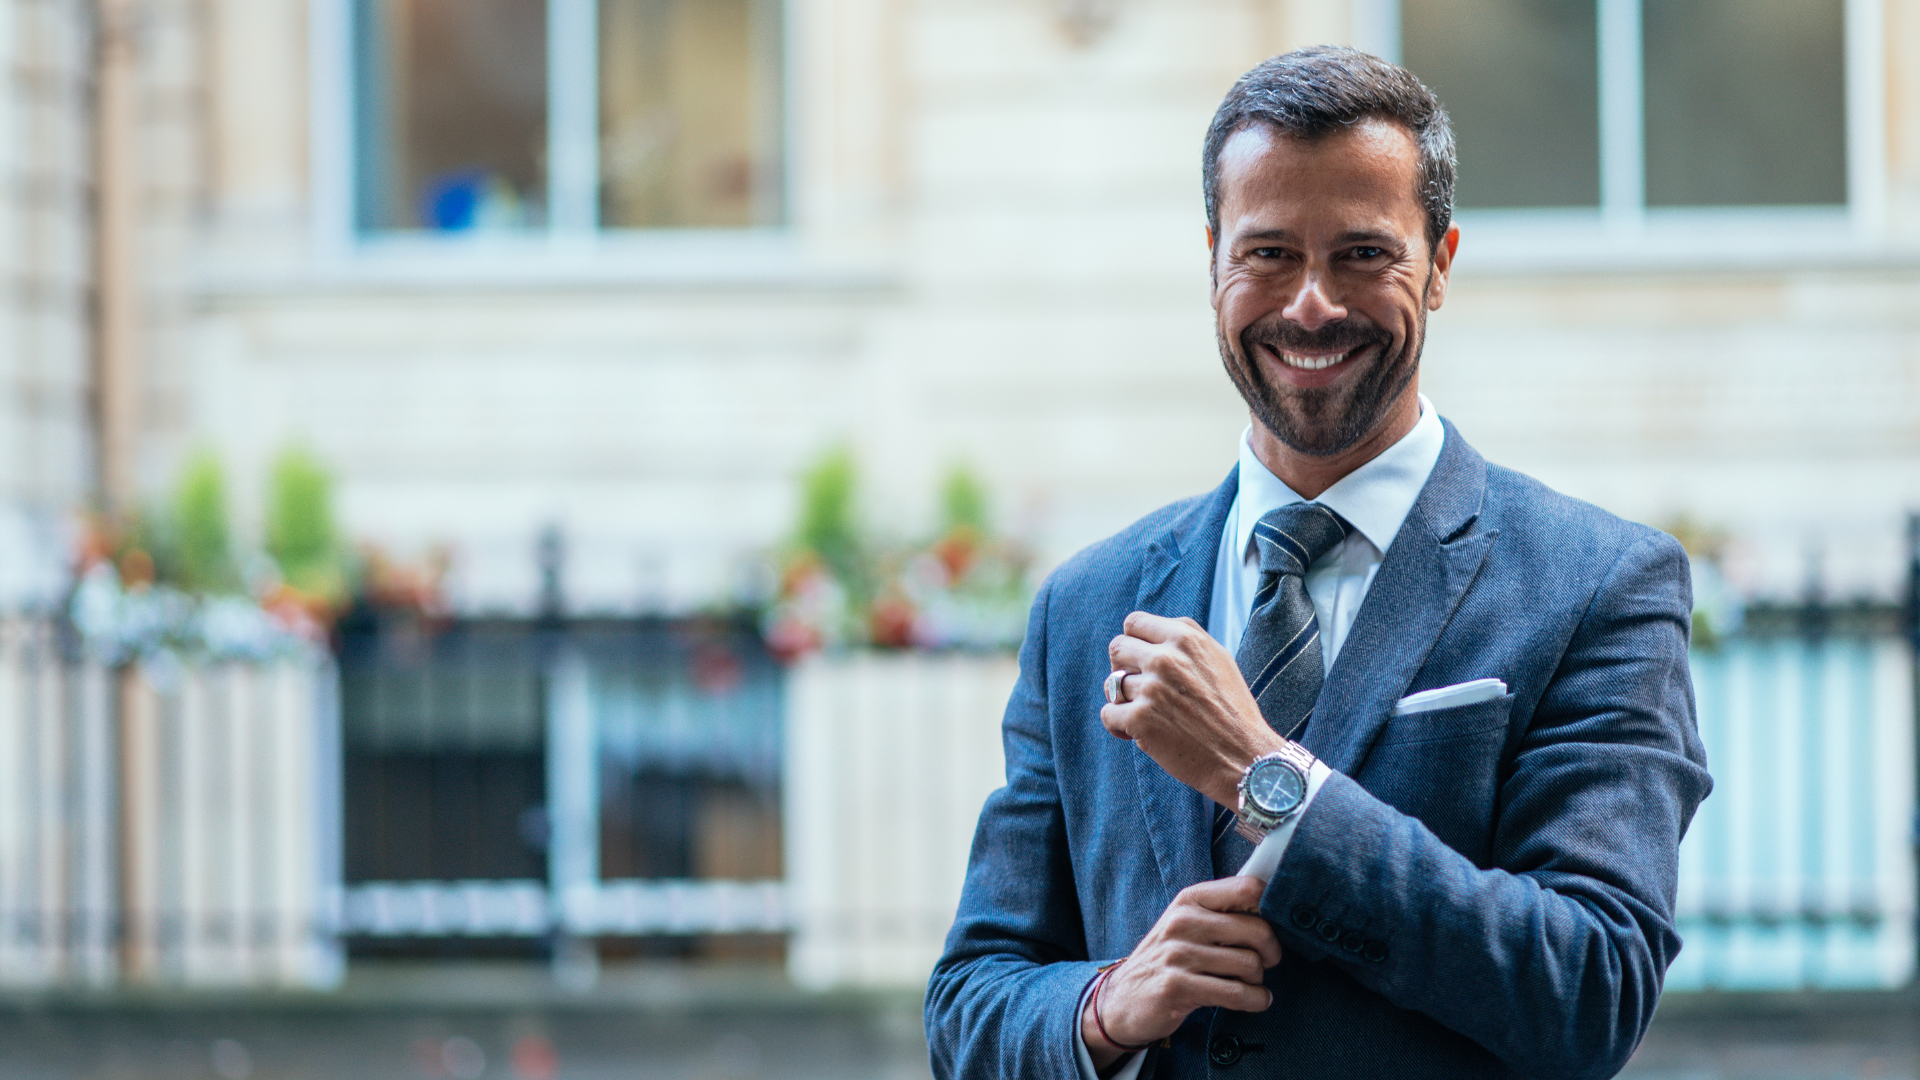 Image is of a professional male in a business suit smiling at the camera. Thumbnail is to convey to advisors how they can attract high net worth clients